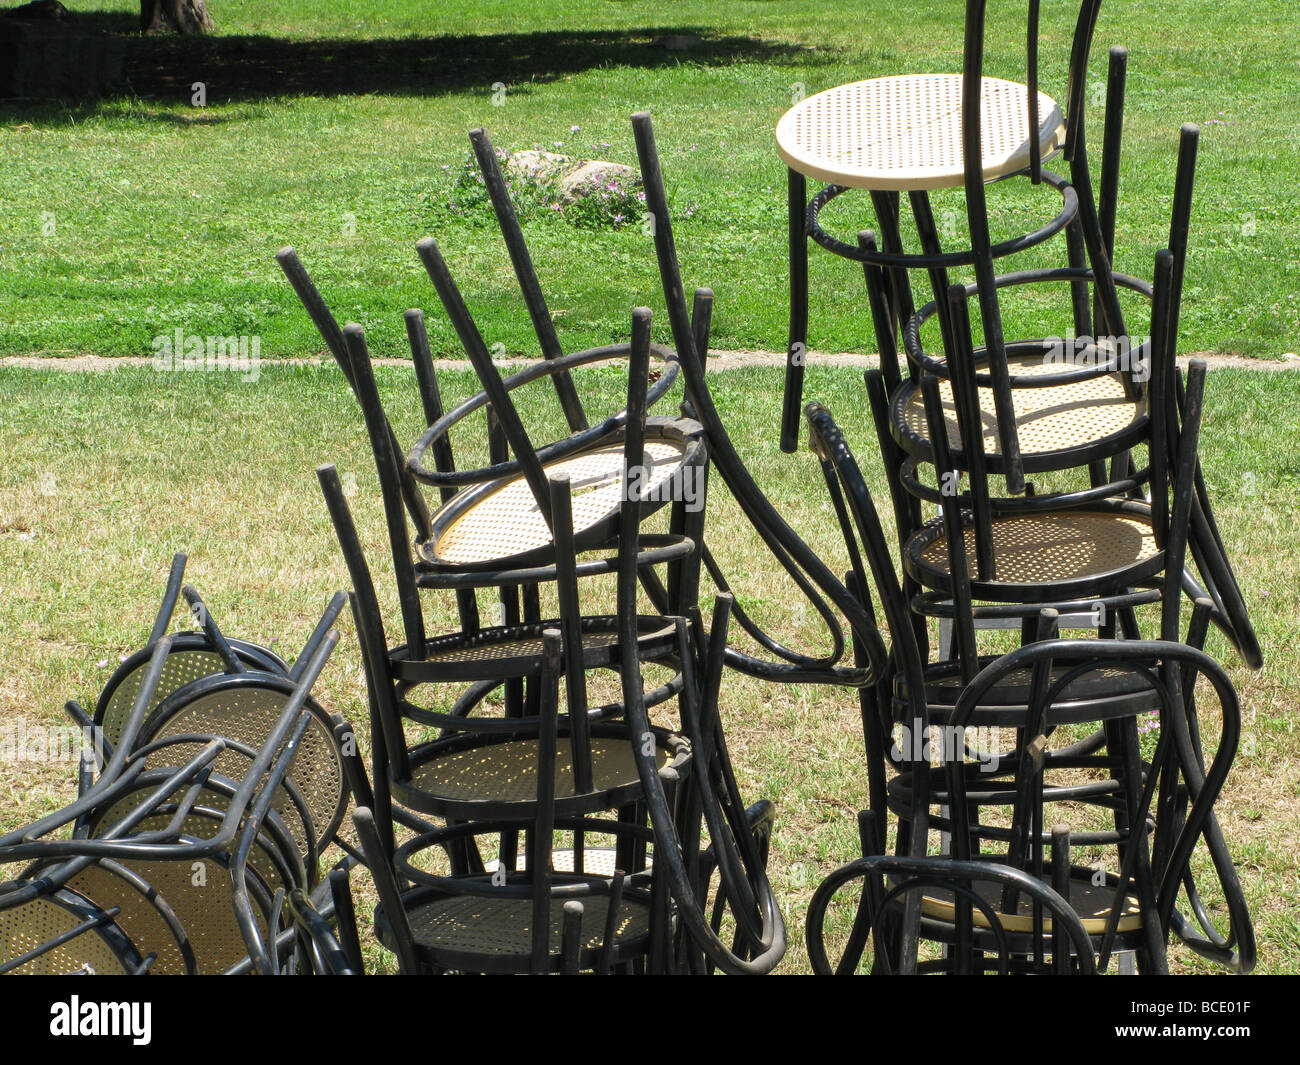 Pile Of Chairs In Field In Sun Outdoors Stock Photo 24893611 Alamy